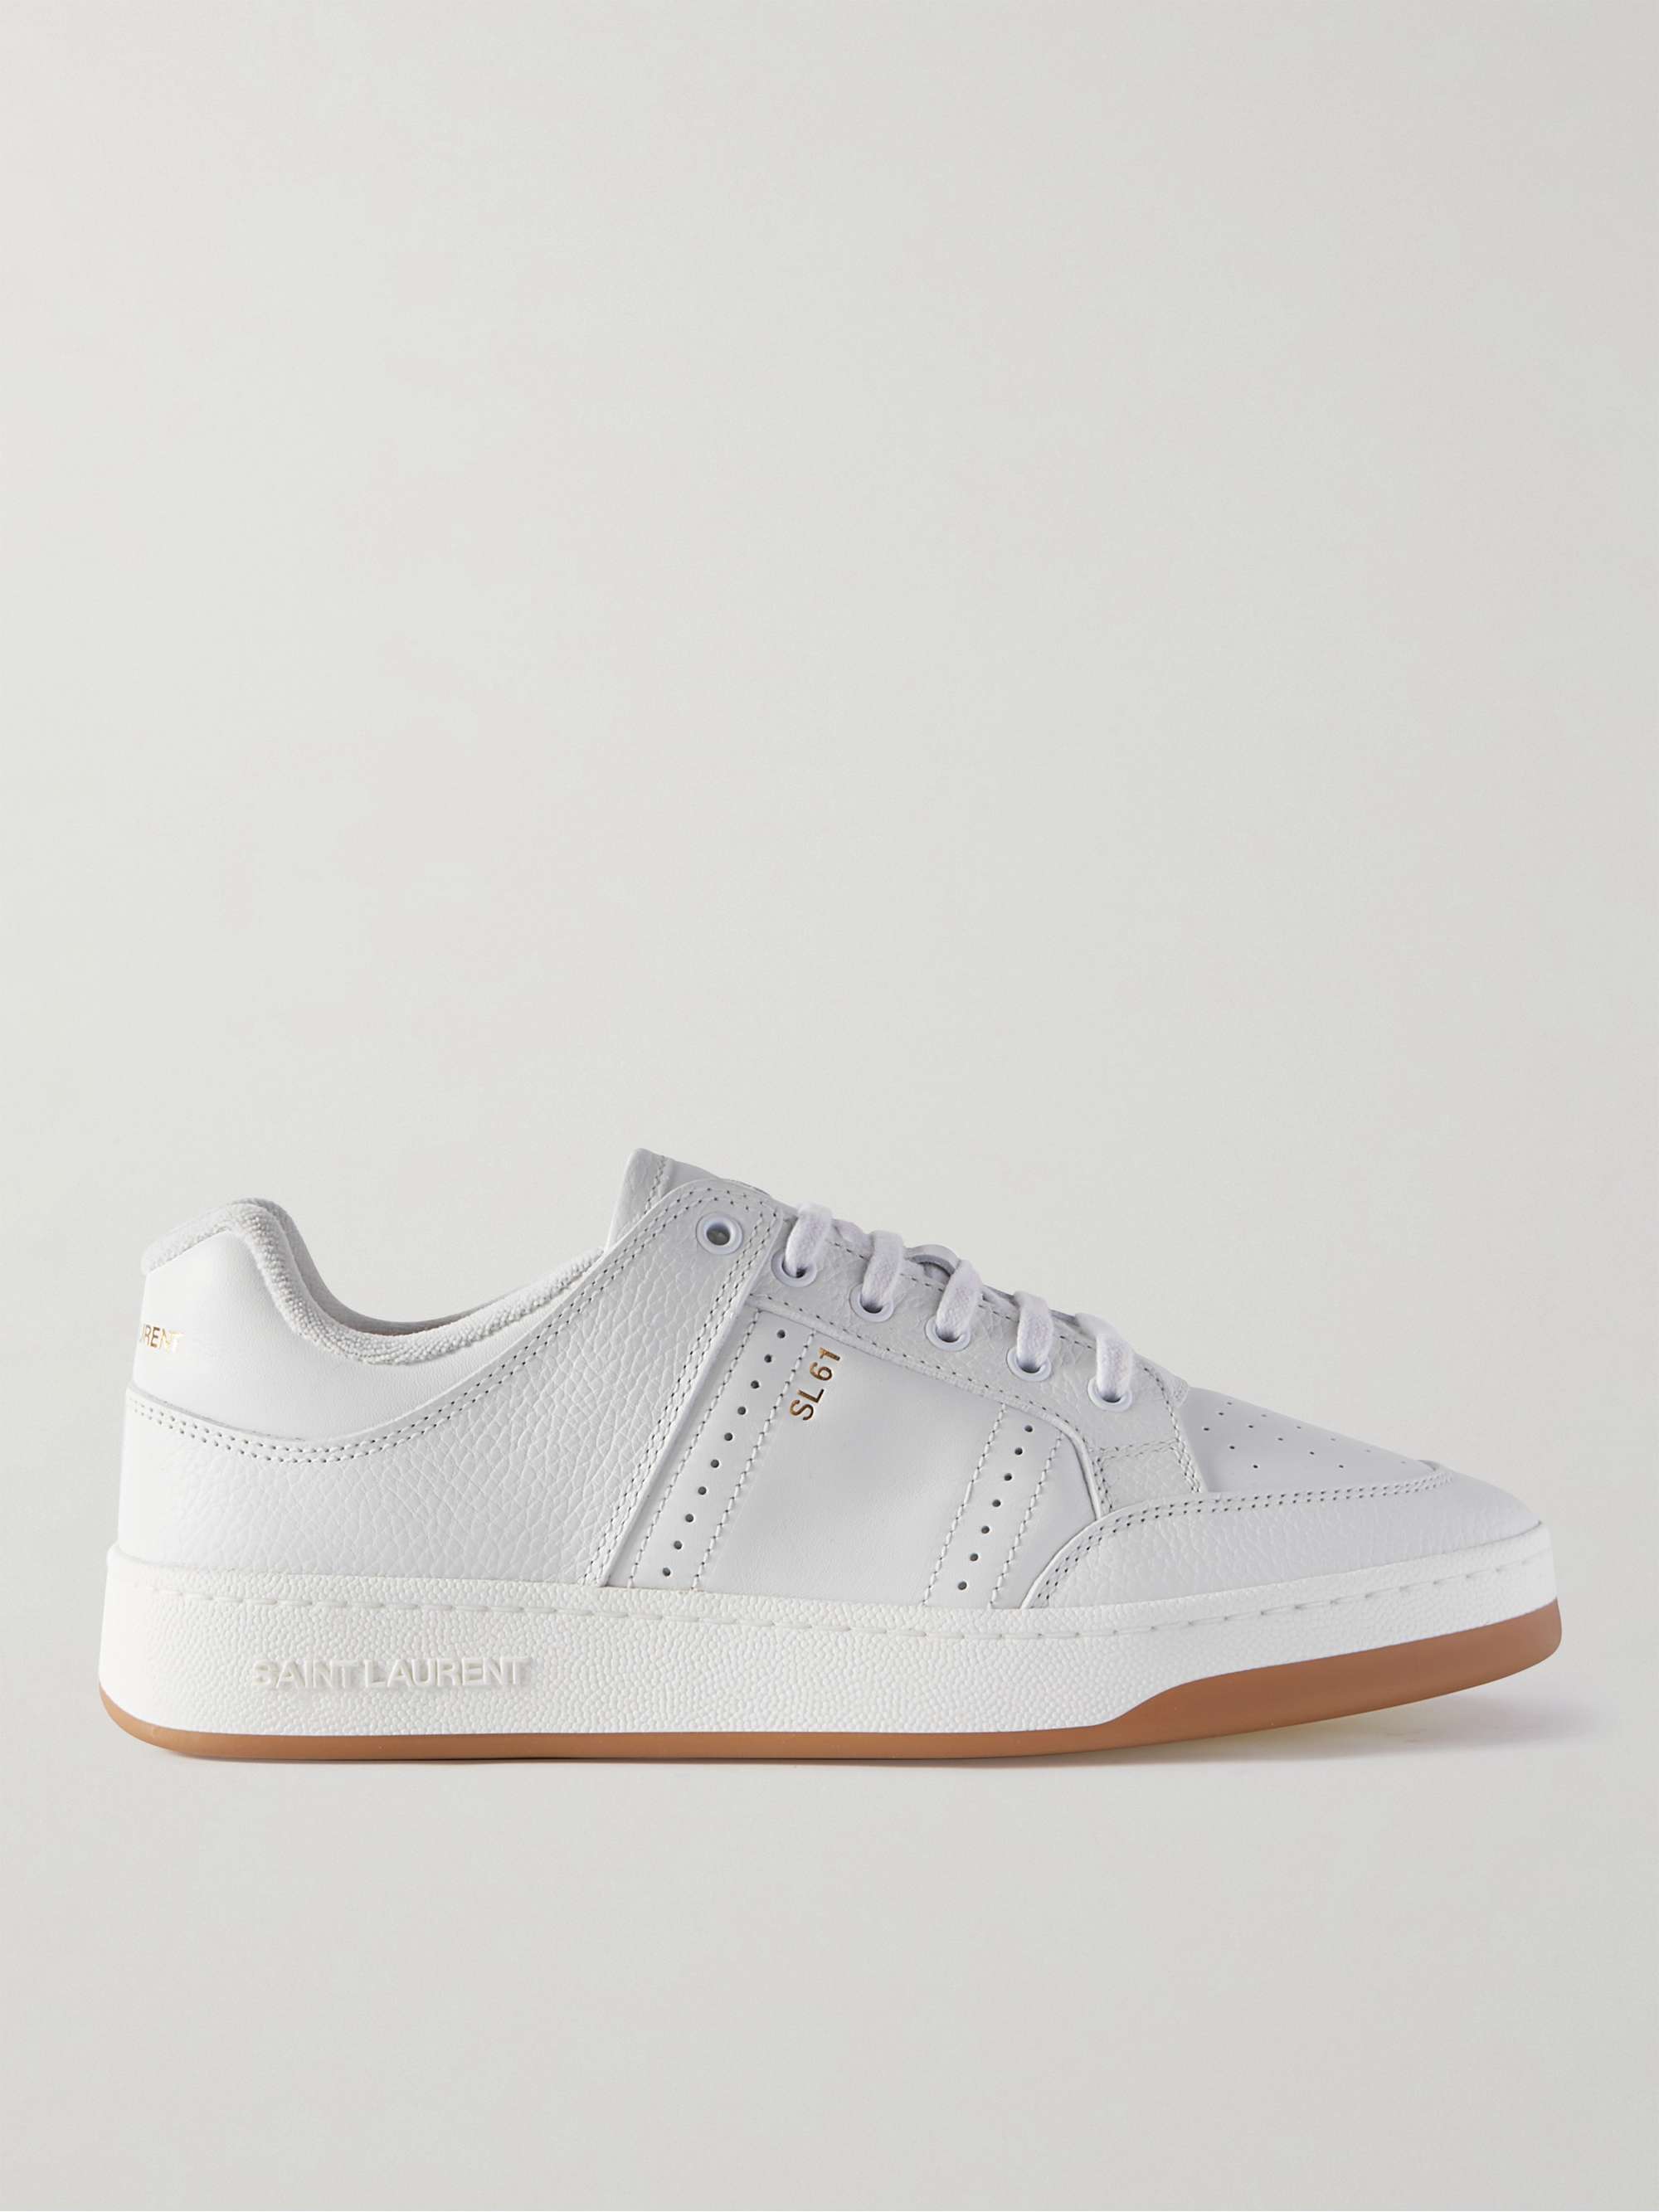 SAINT LAURENT SL/61 Perforated Leather Sneakers for Men | MR PORTER